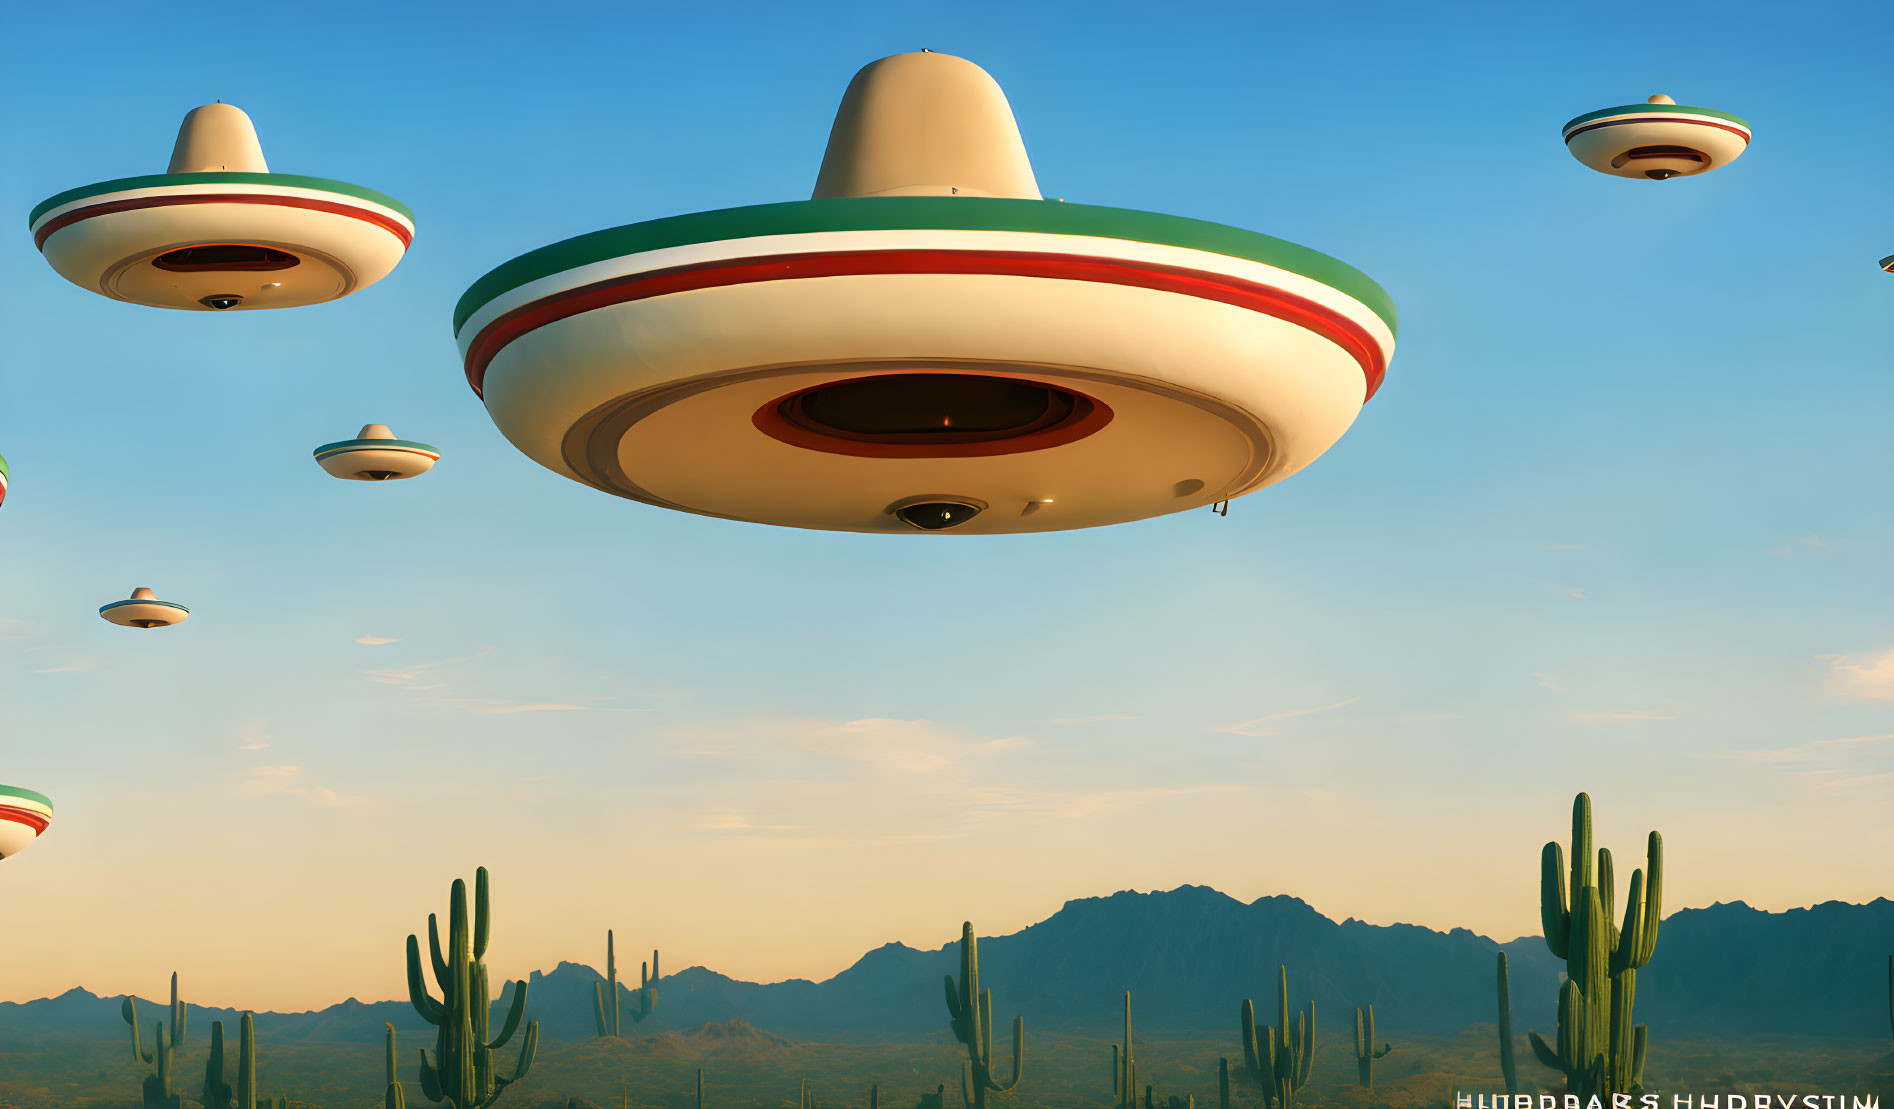 Alien Saucer Invasion From Planet Mexico